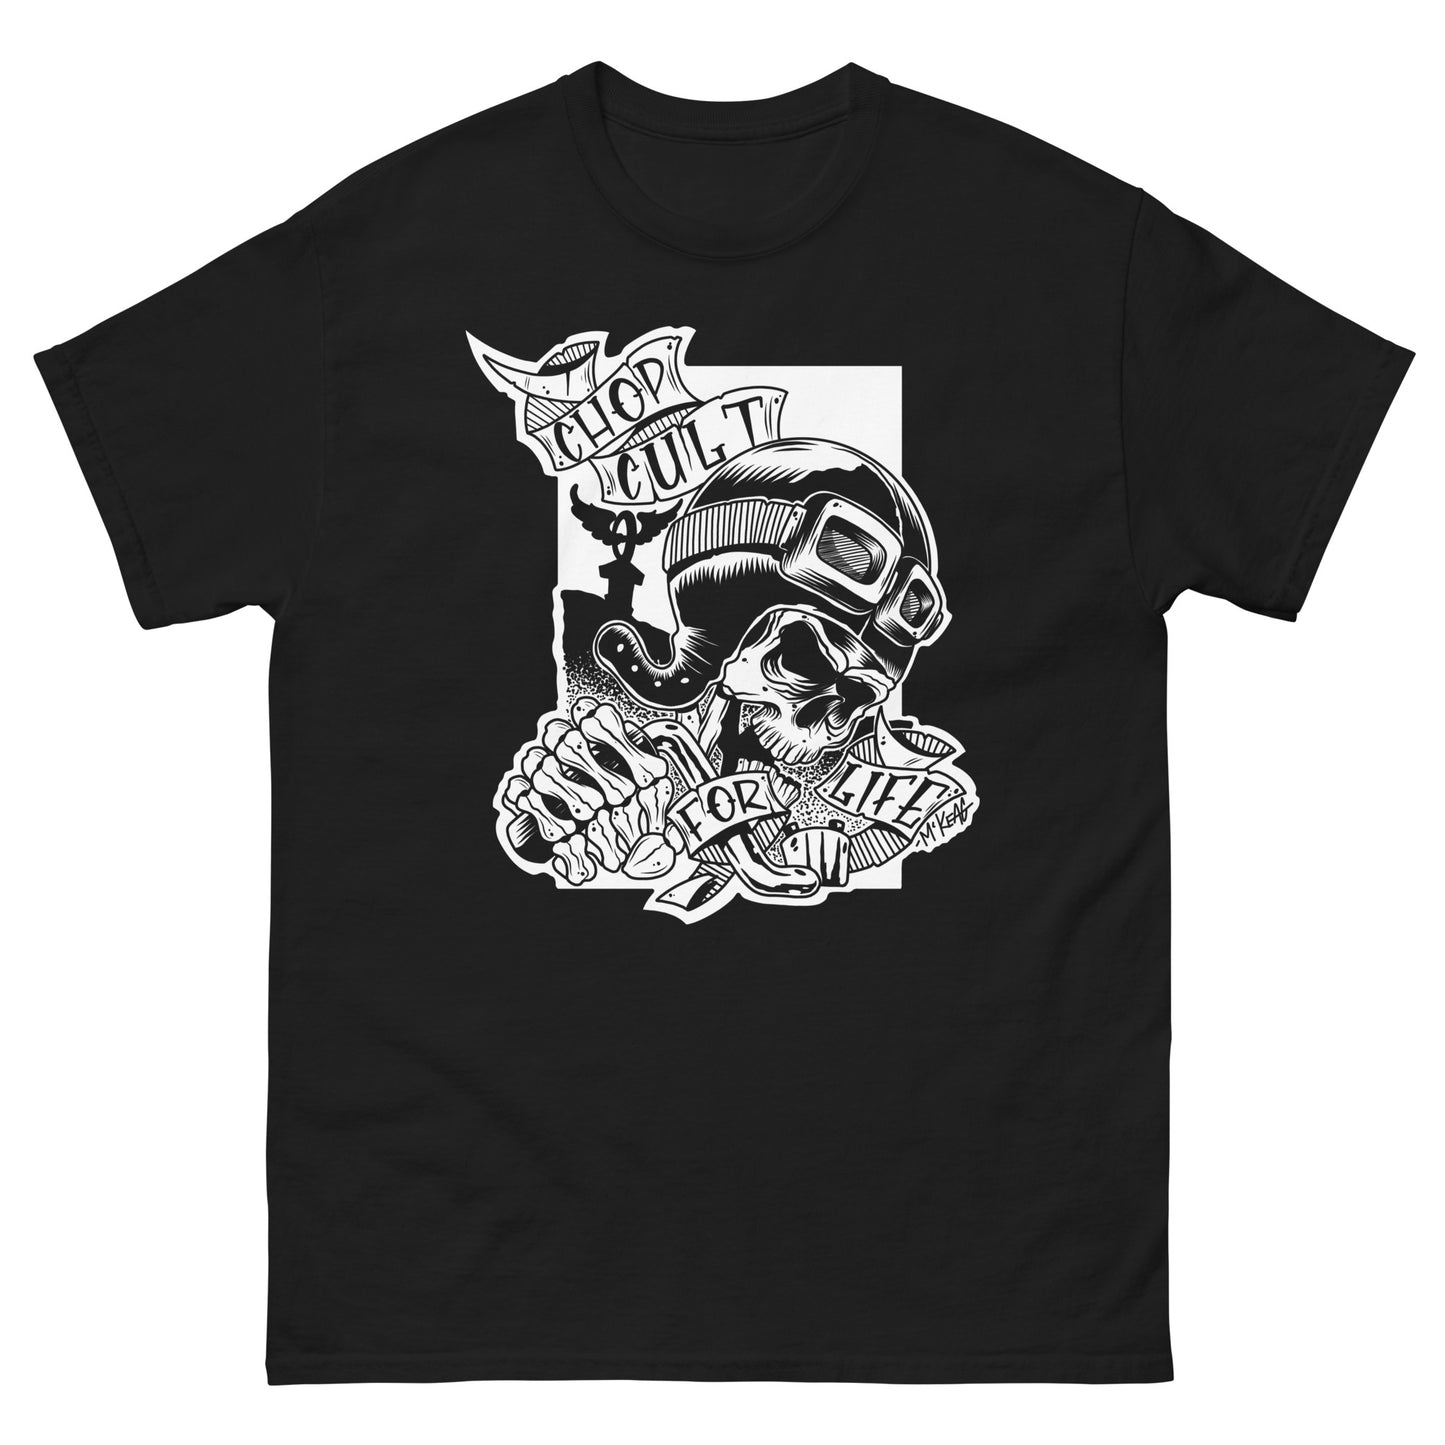 ChopCult for Life T Shirt By Darren McKeag - Black